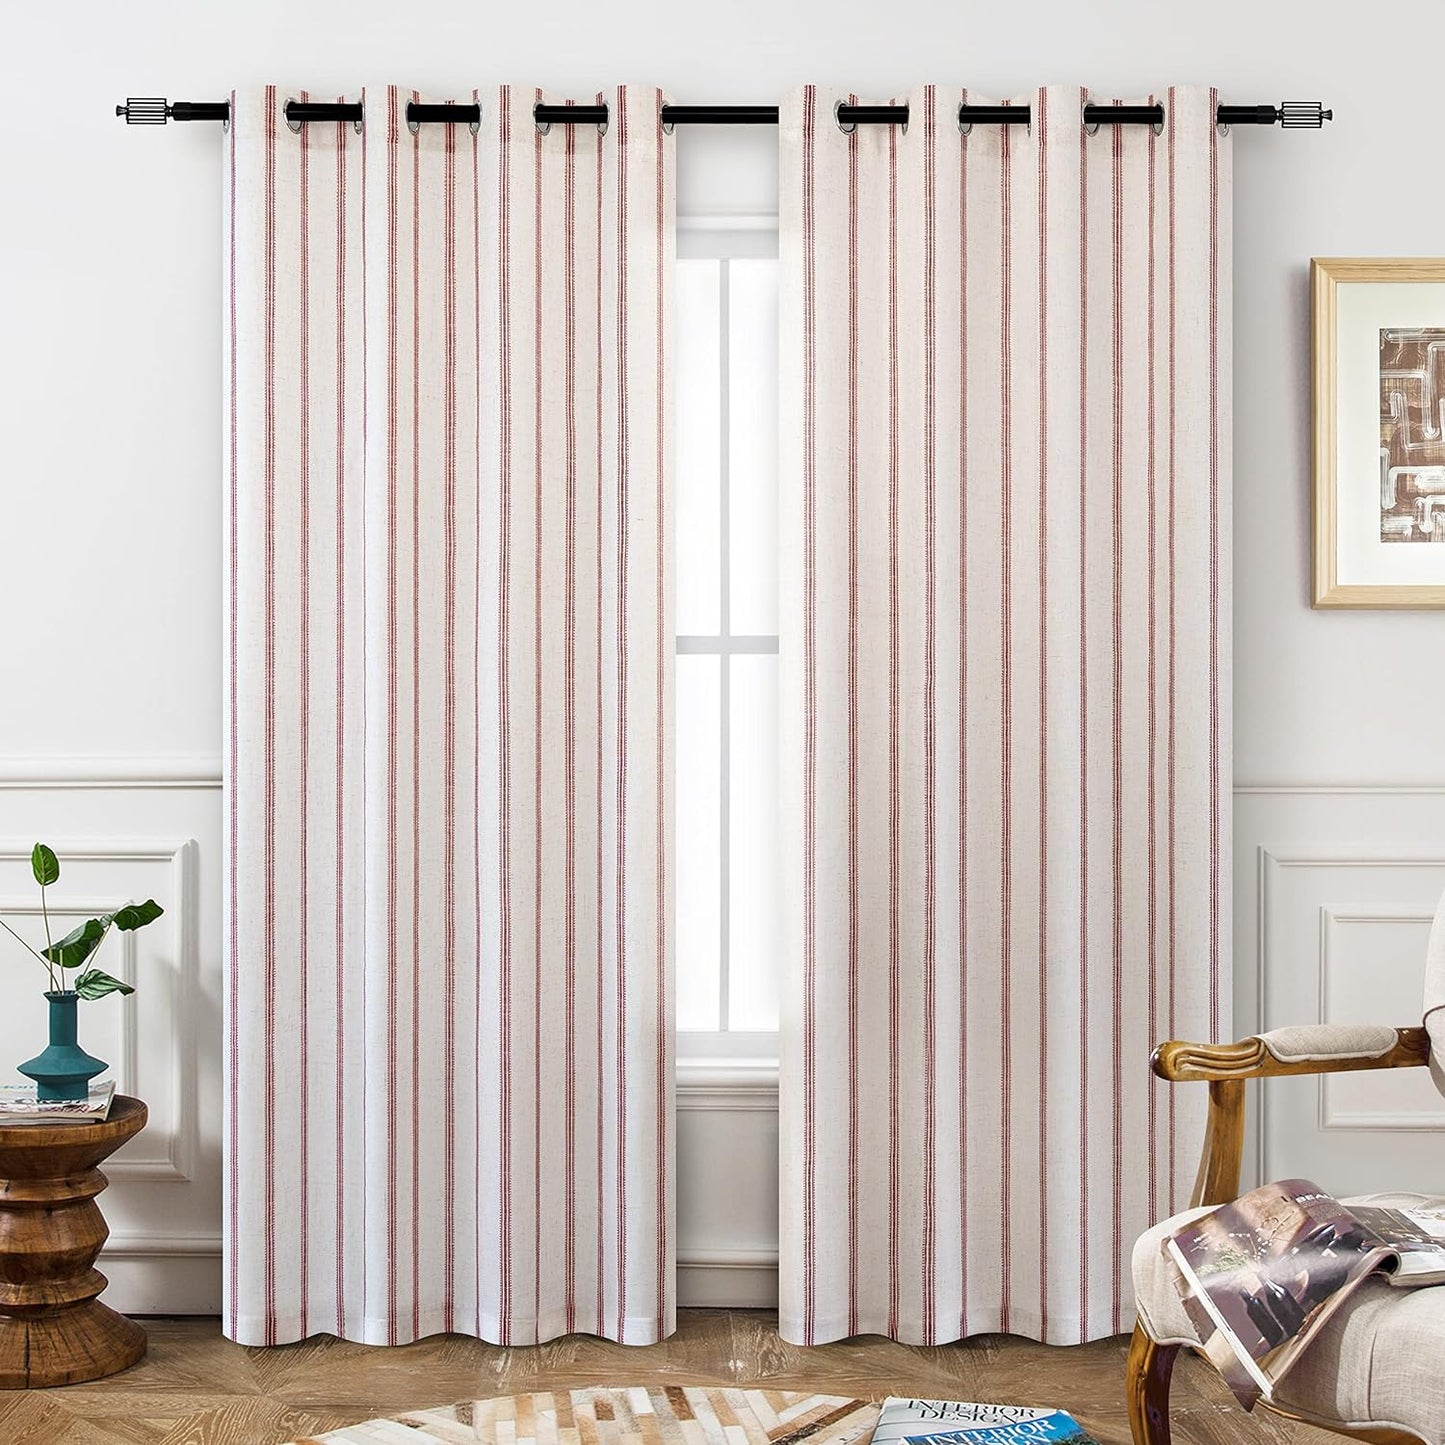 Driftaway Farmhouse Linen Blend Blackout Curtains 84 Inches Long for Bedroom Vertical Striped Printed Linen Curtains Thermal Insulated Grommet Lined Treatments for Living Room 2 Panels W52 X L84 Grey  DriftAway Red 52"X84" 